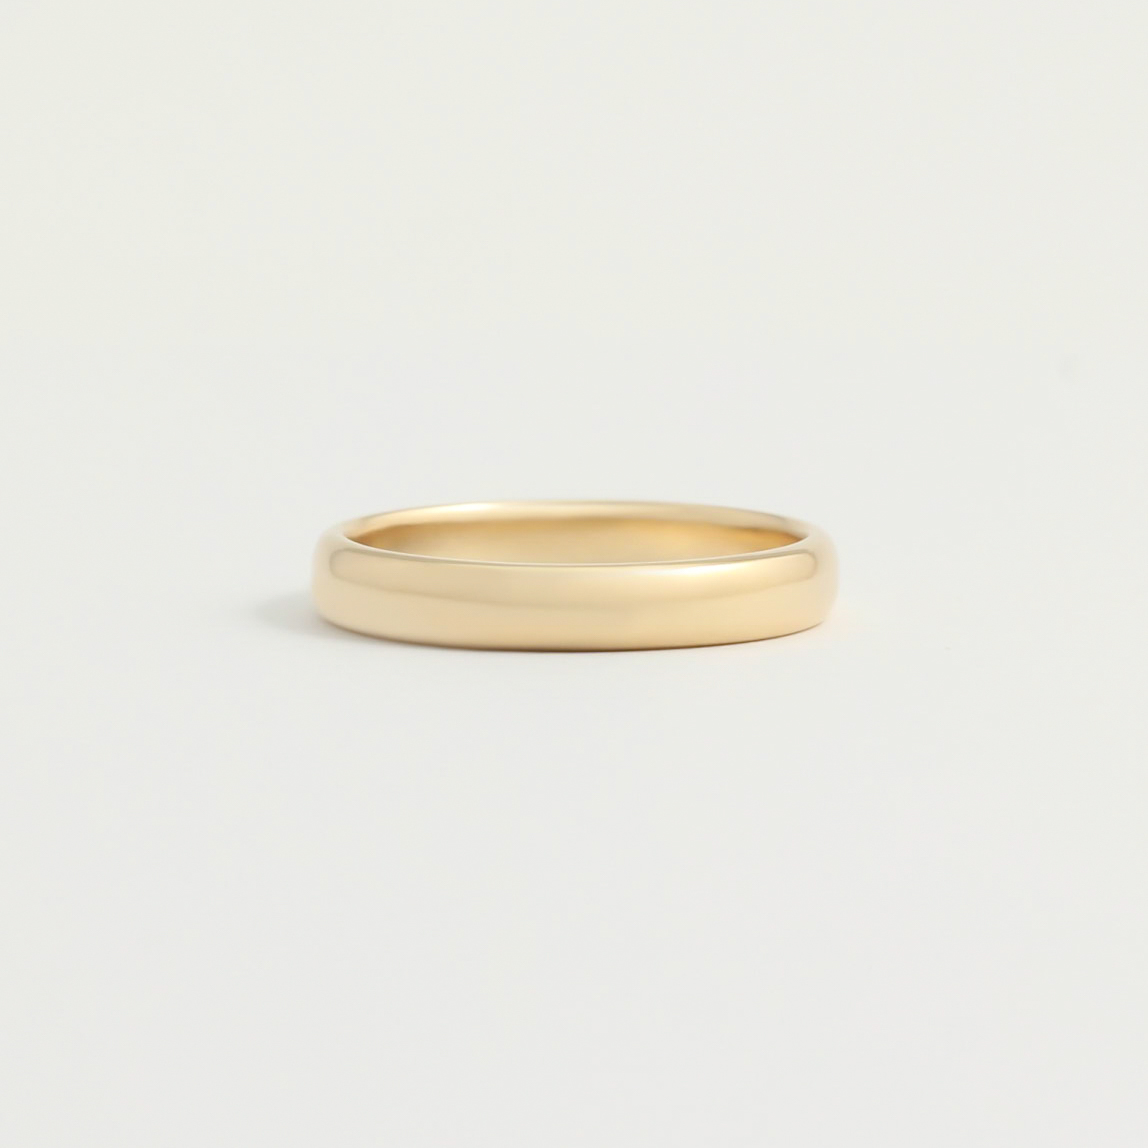 A gold wedding band from Good Gold